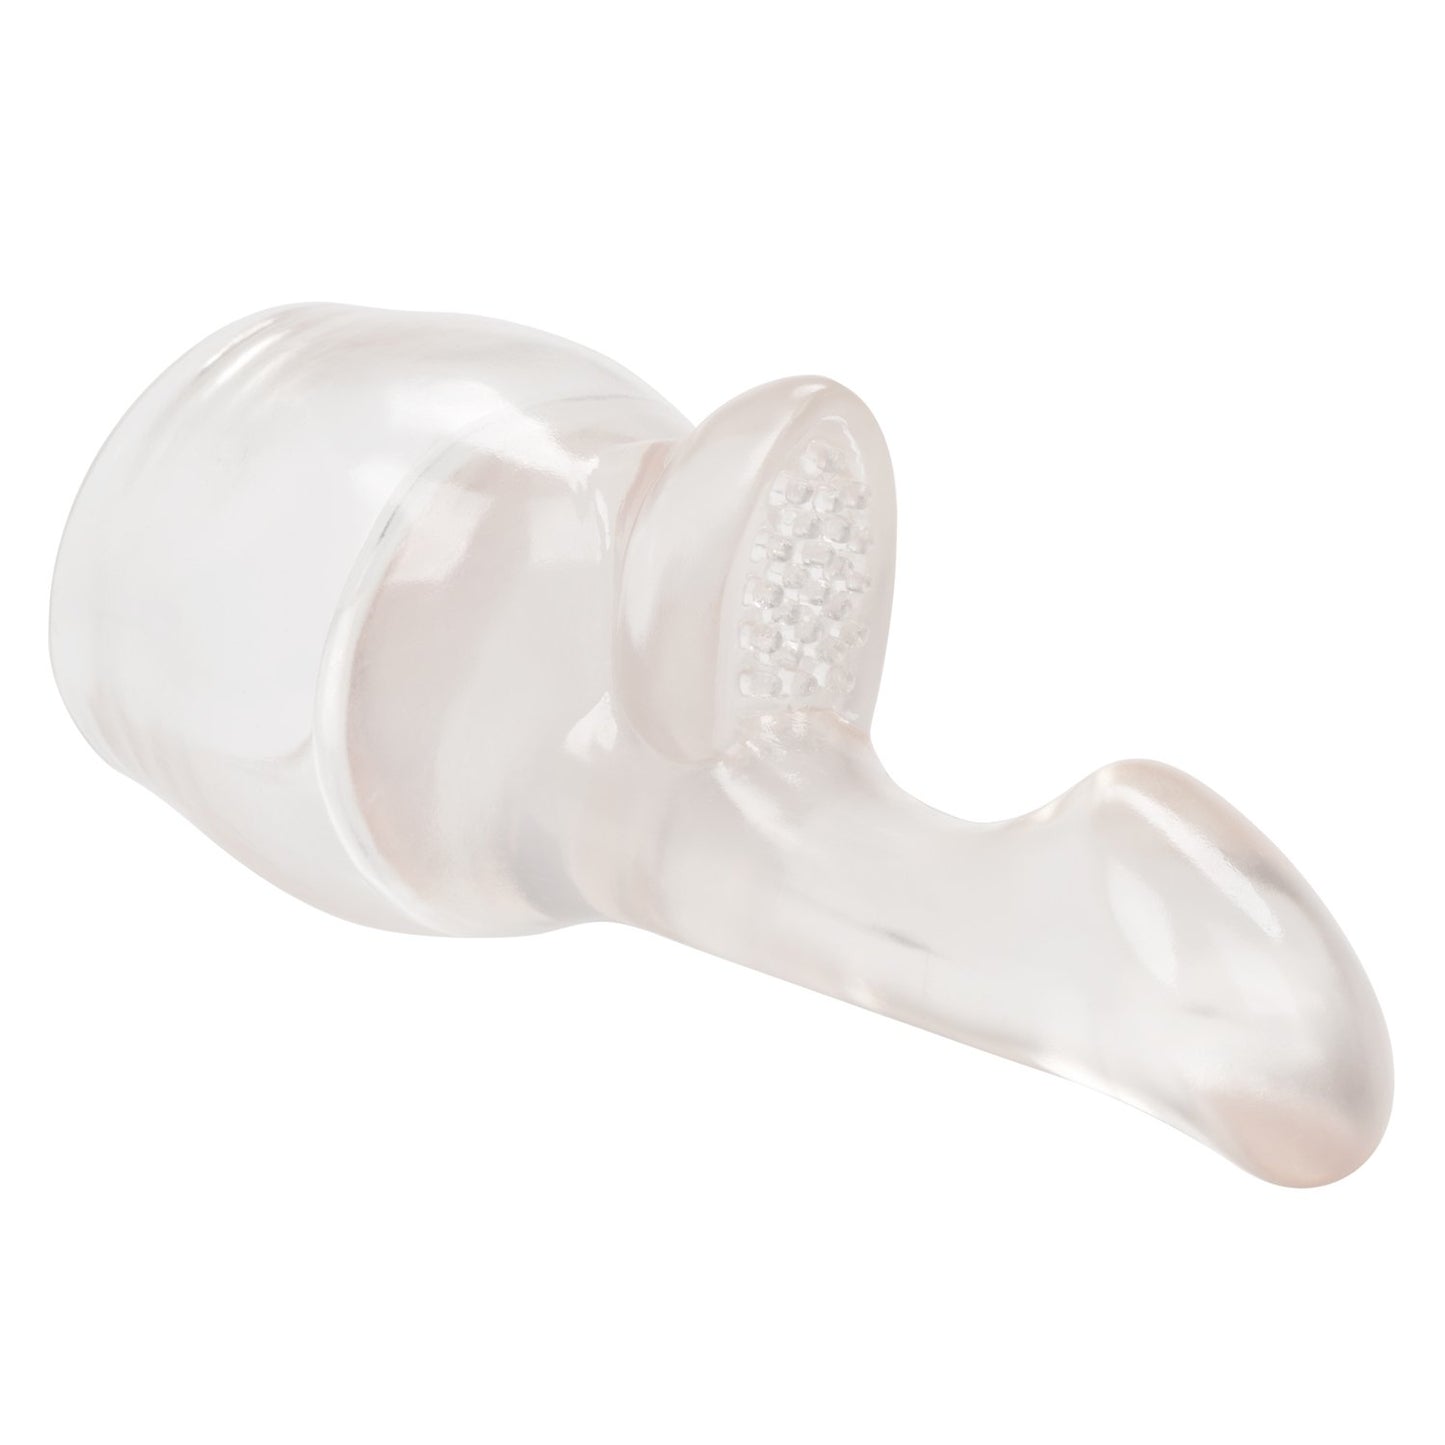 Miracle Massager Accessory For Her